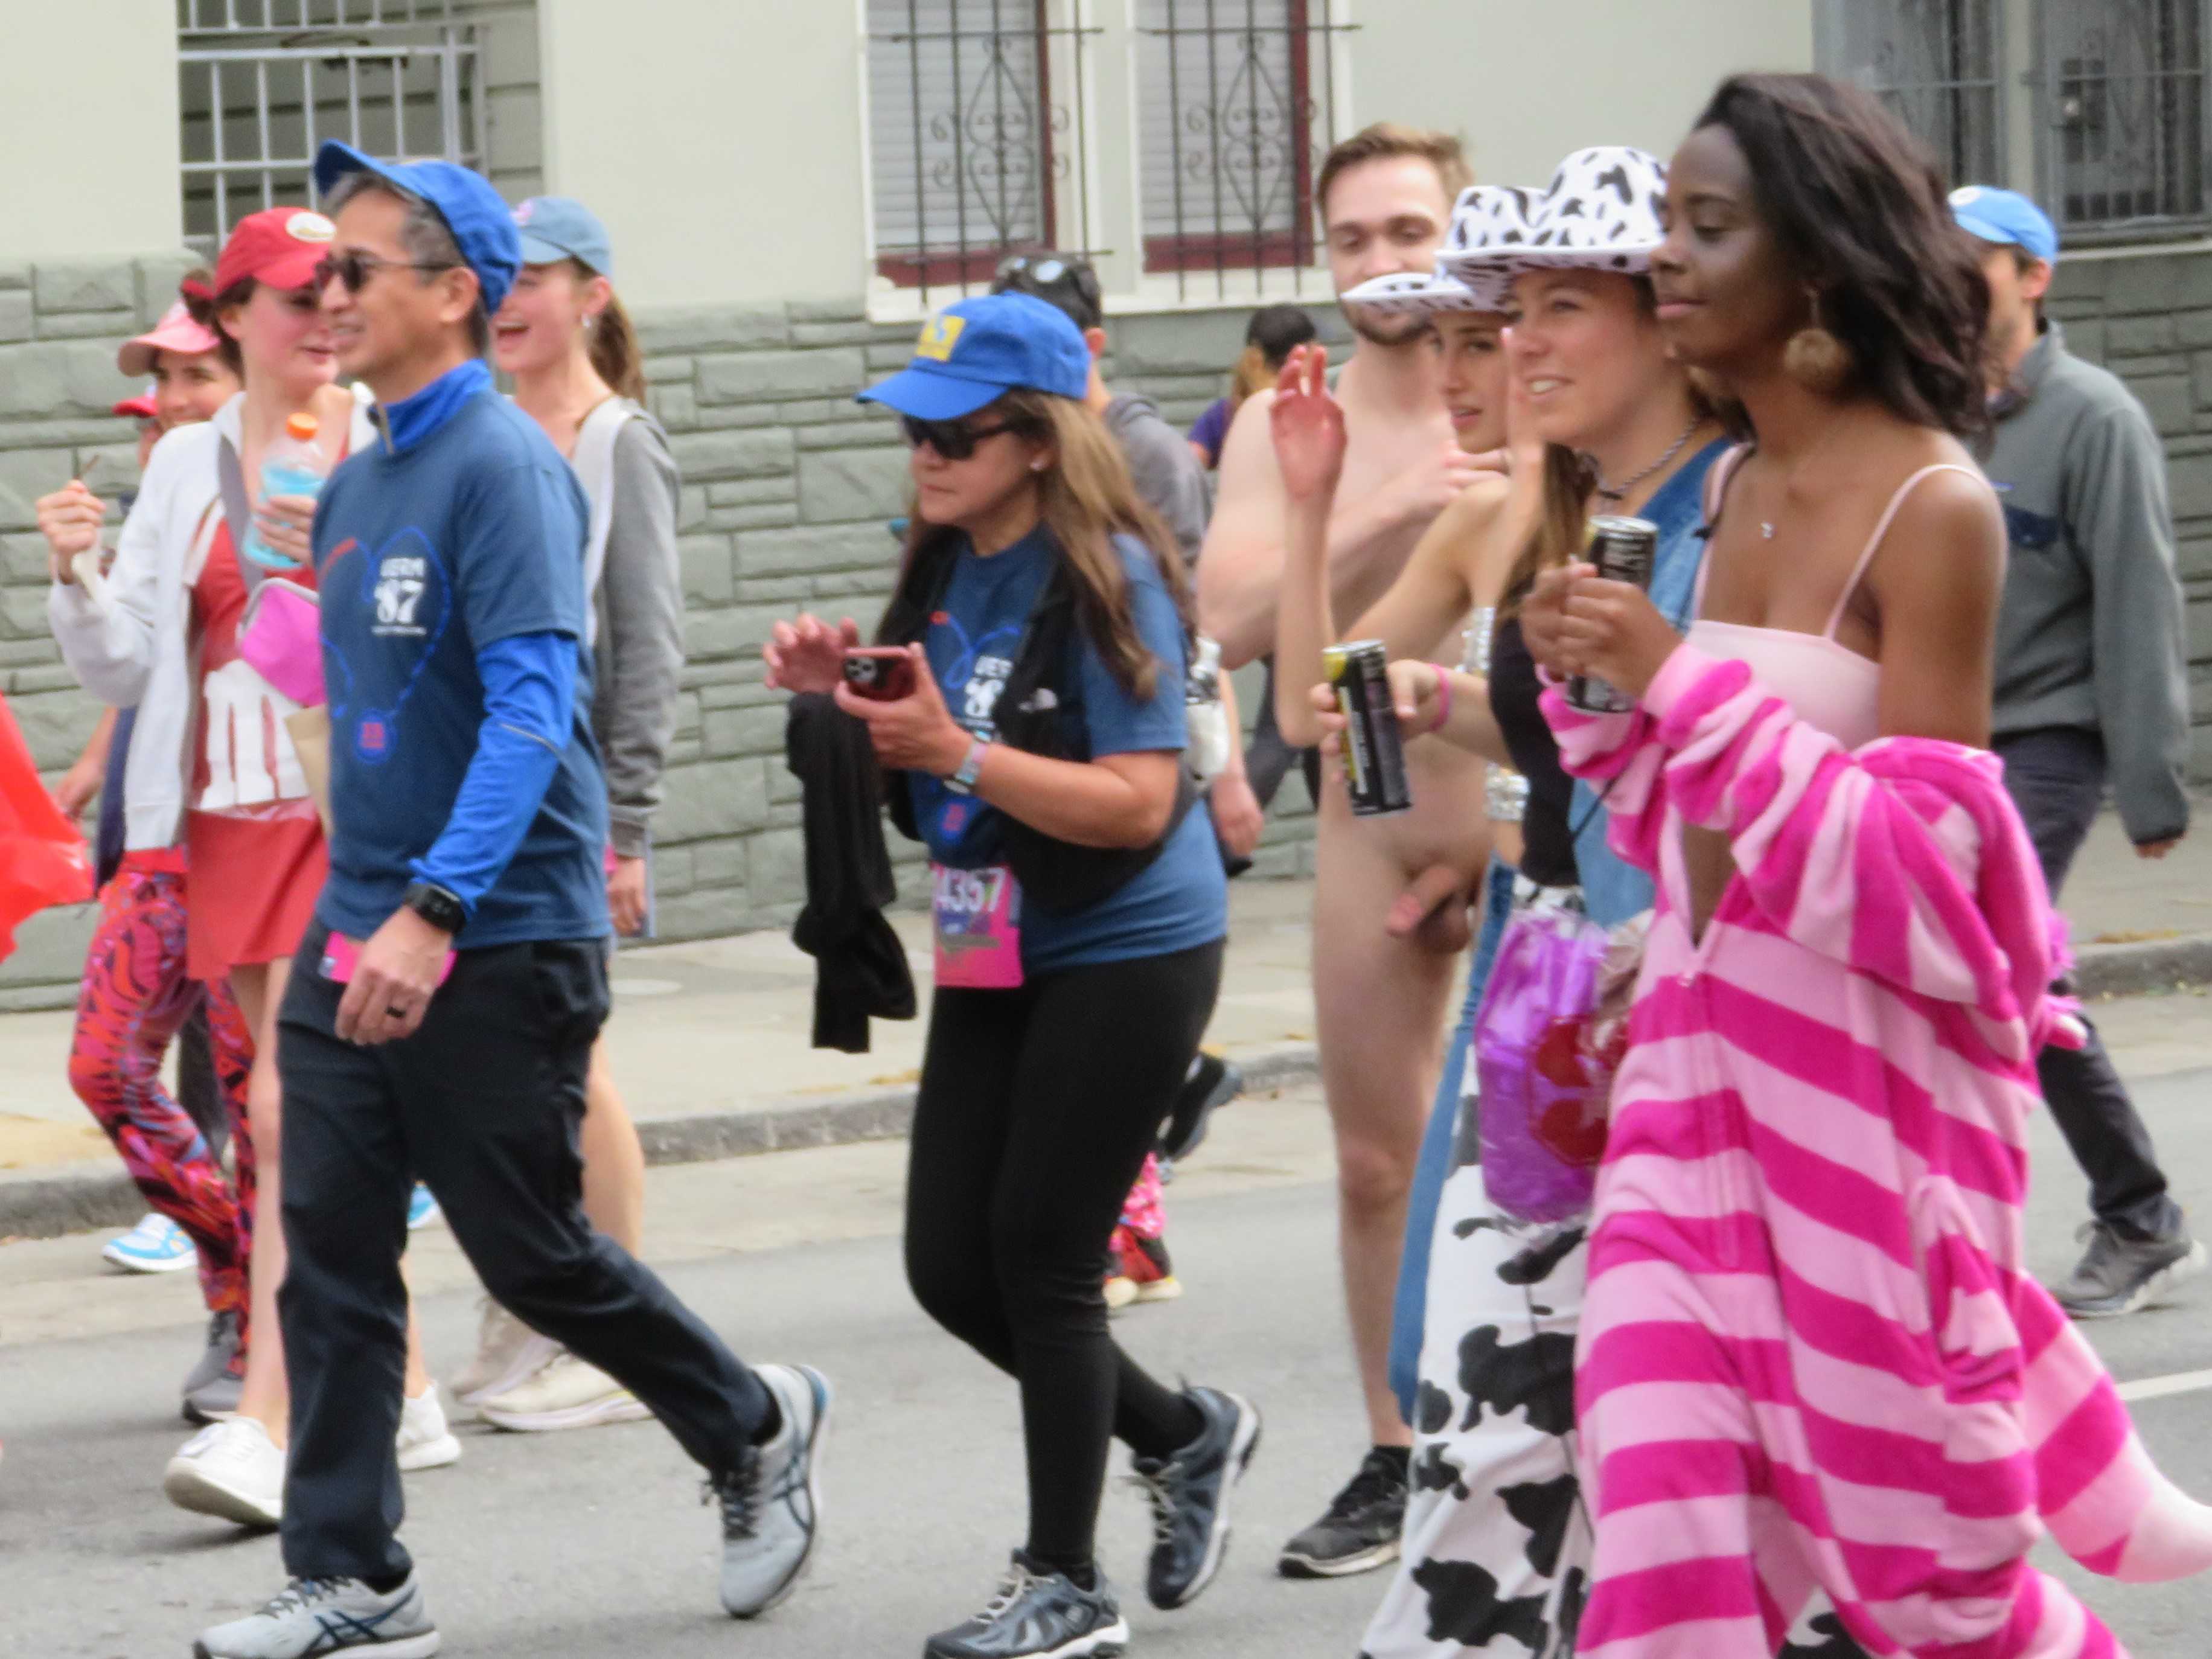 guys naked in public at Bay to breakers 3